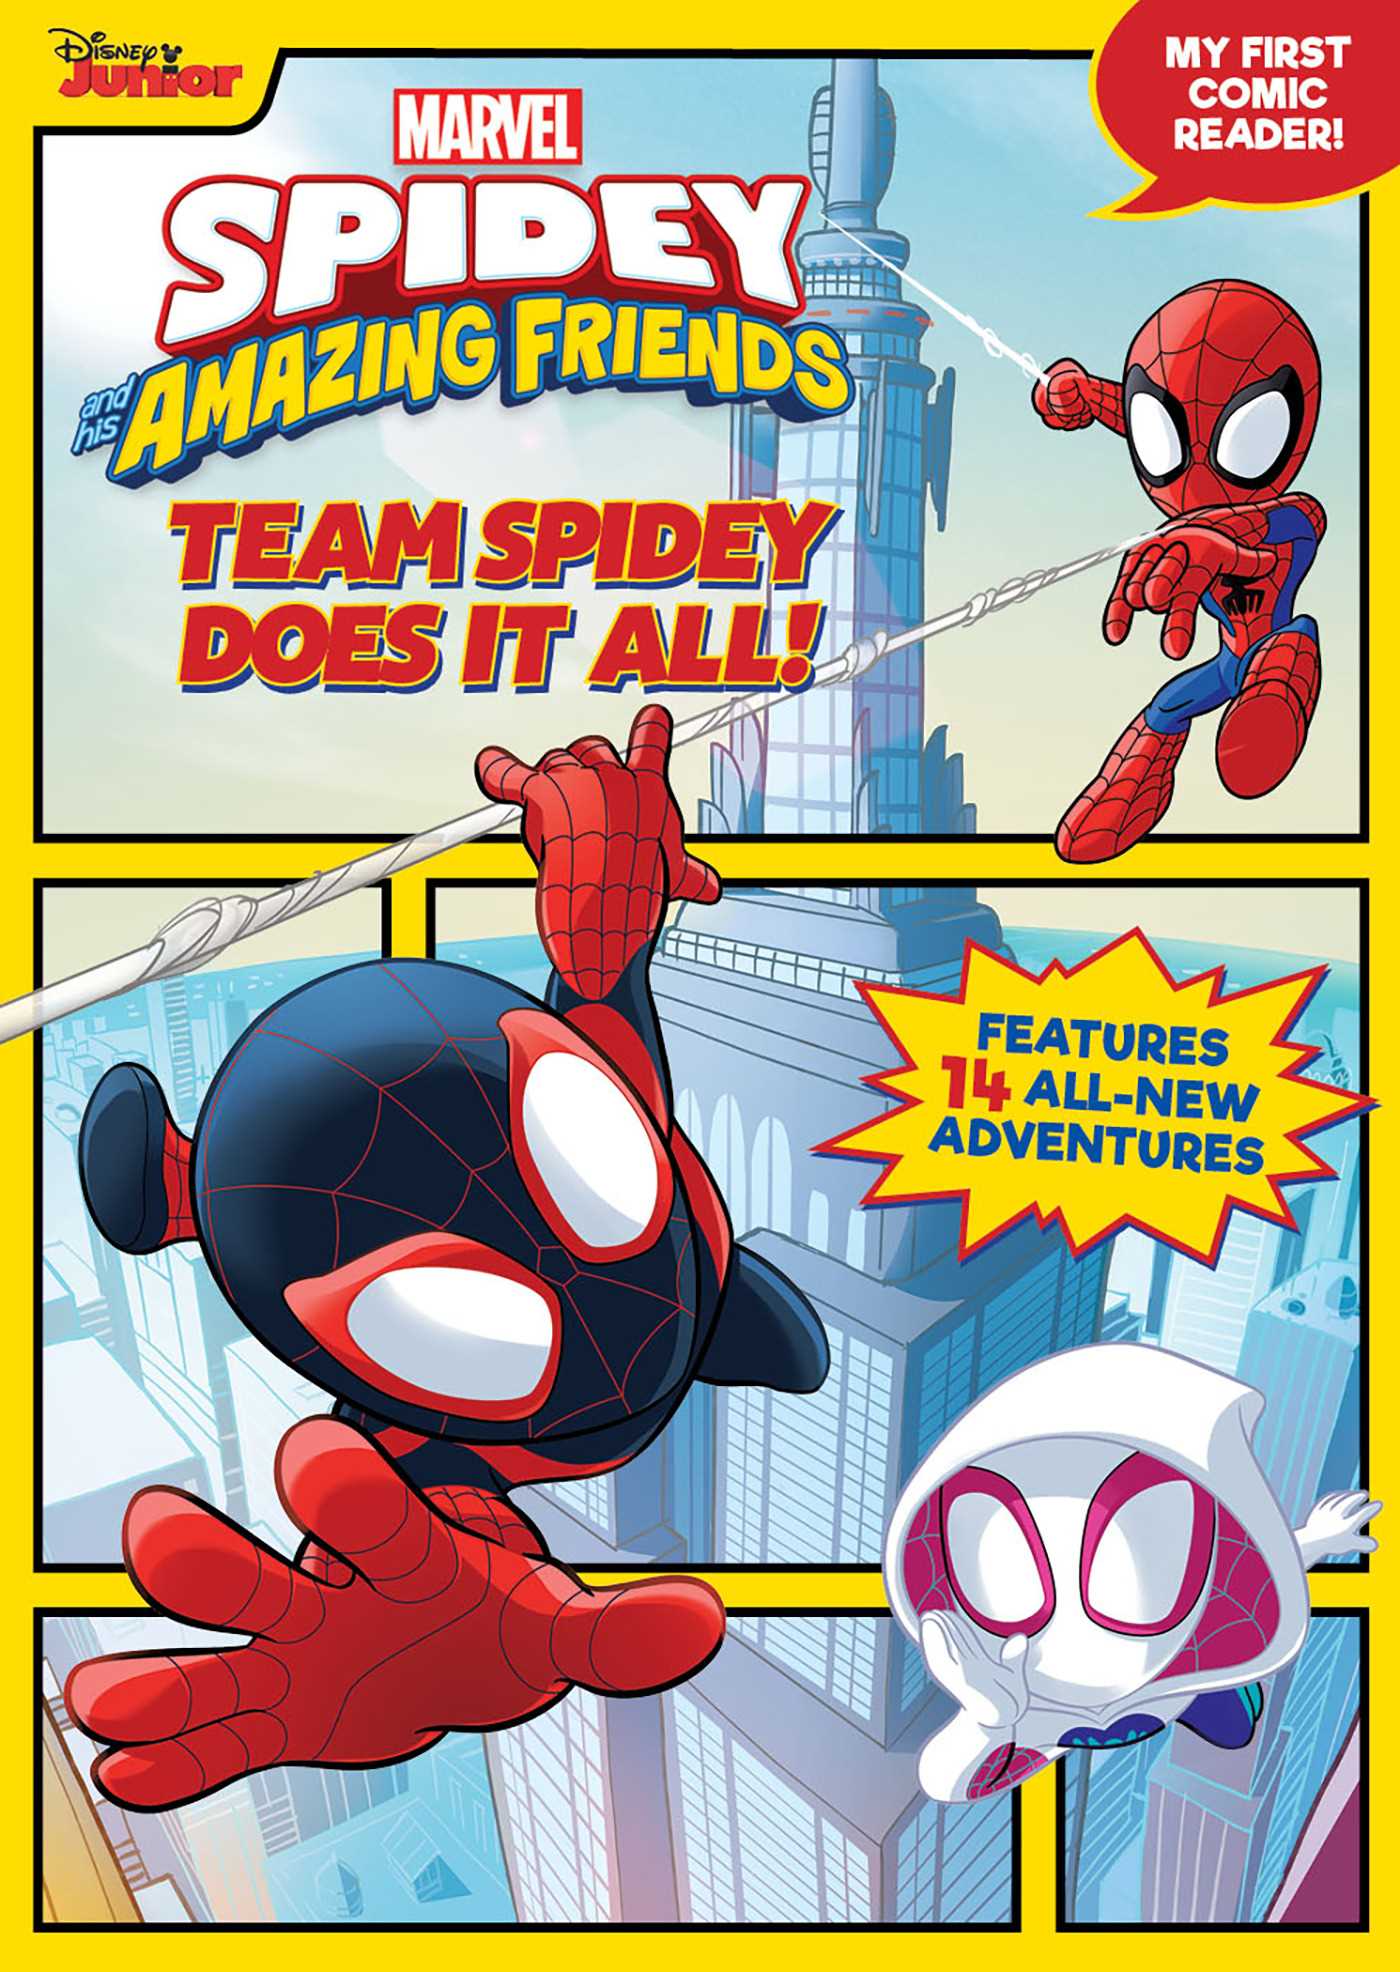 Team Spidey Does It All! (My First Comic Reader!)